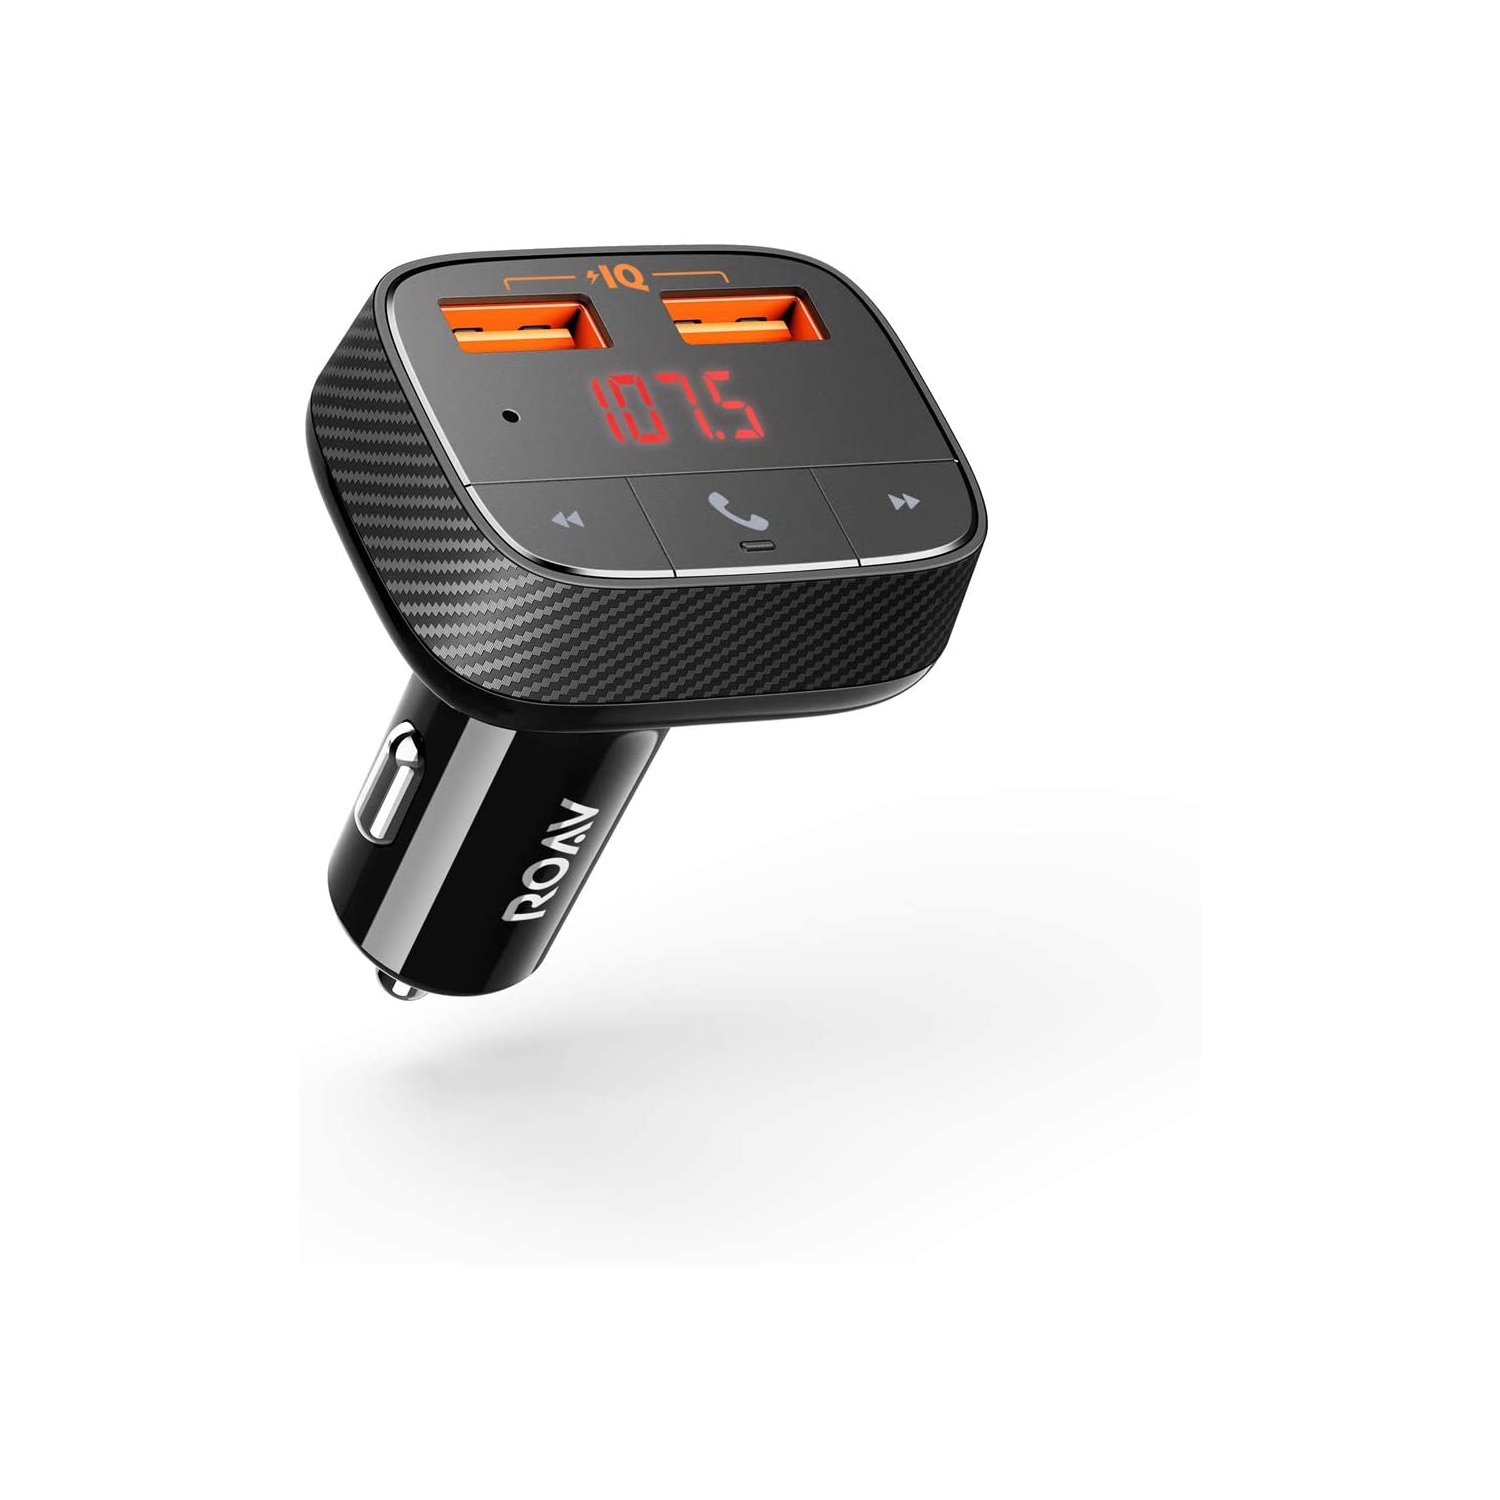 Tuning In: Changing Stations On A Bluetooth FM Transmitter